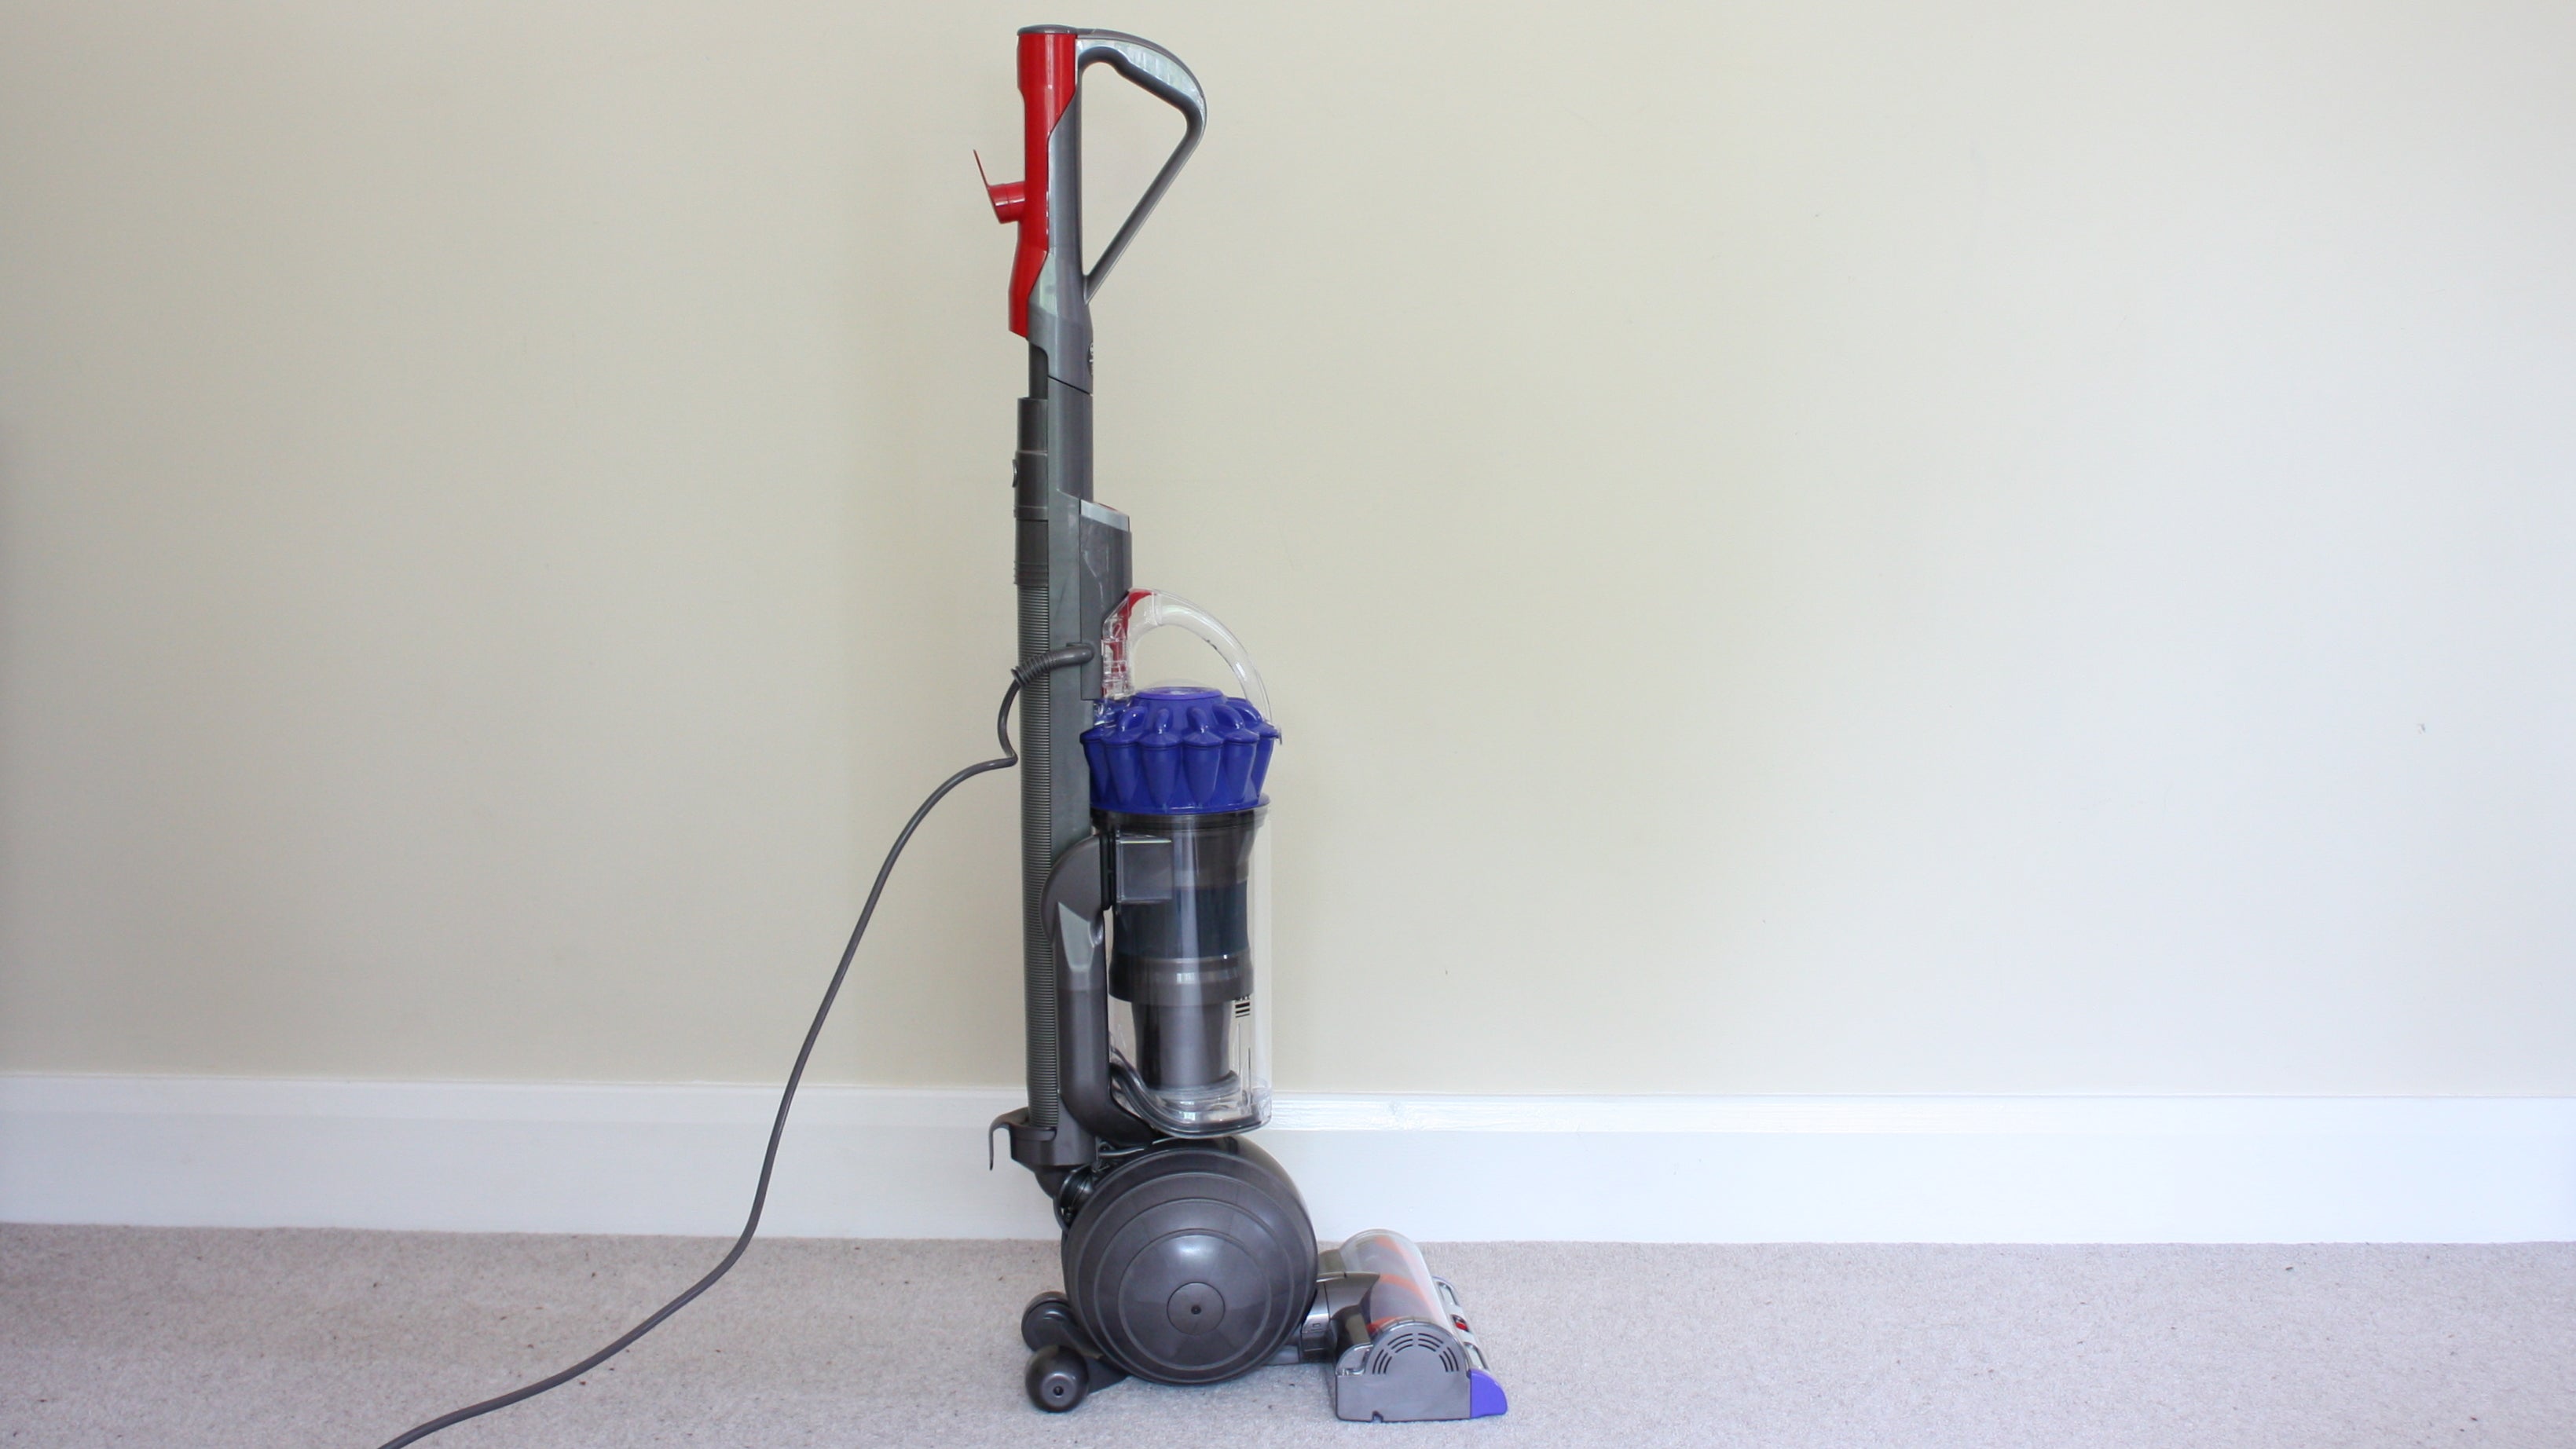 Dyson Small Ball Allergy review: A corded vacuum cleaner that's powerful effective | Expert Reviews